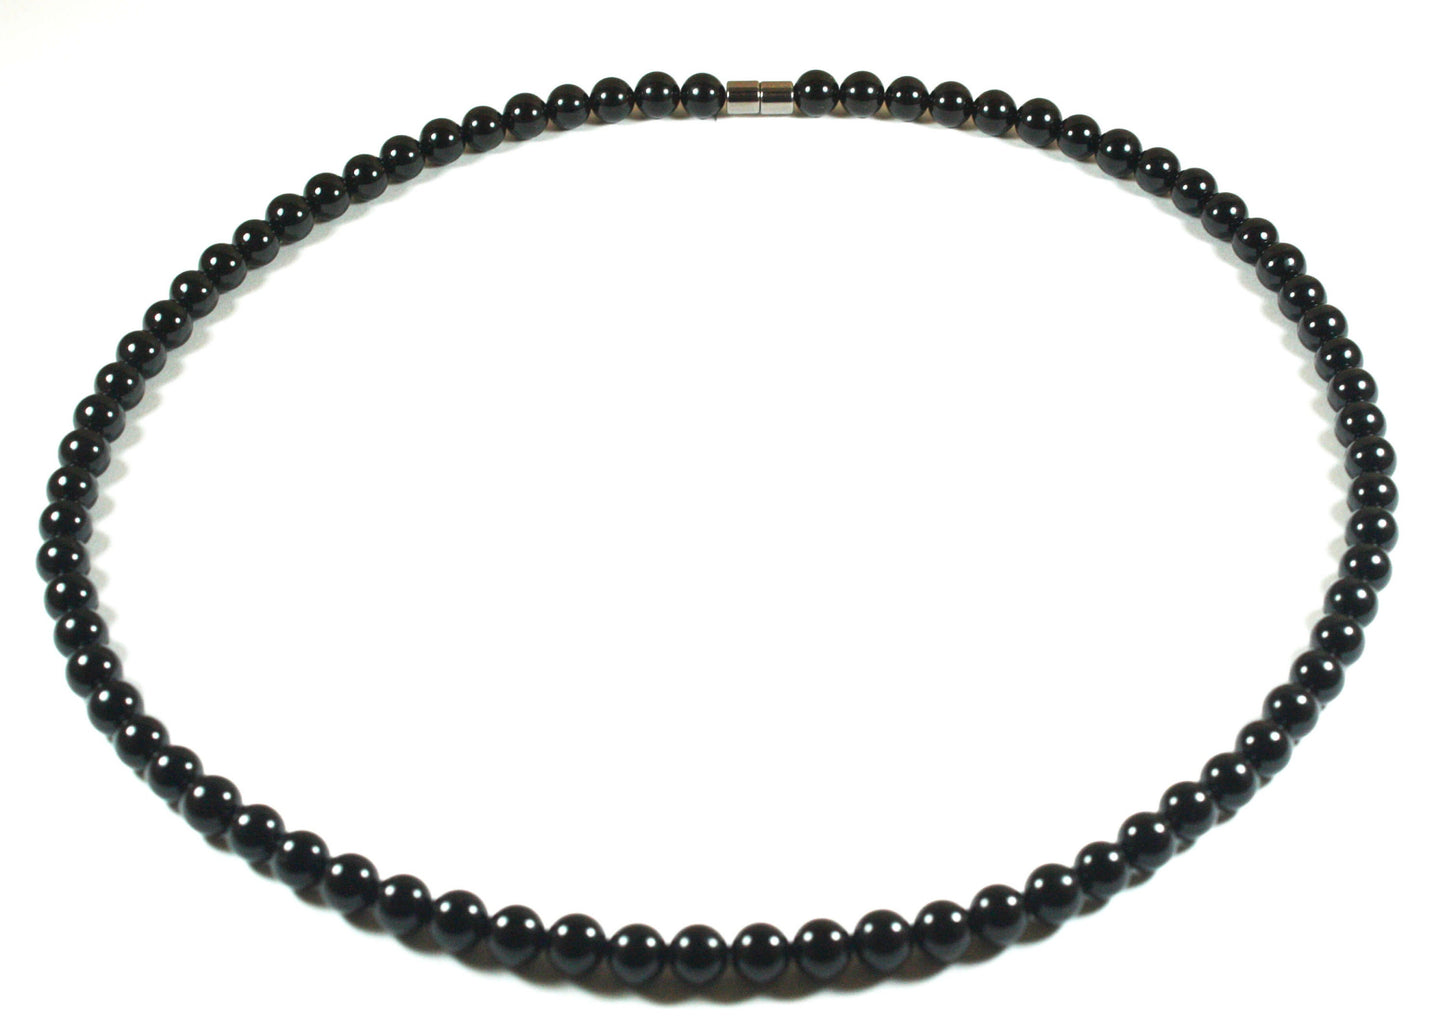 6mm Black Onyx Necklace - EMF Protection Jewelry - Empath Protection - Necklaces for Women/Men - Protection Stones with Magnetic clasp